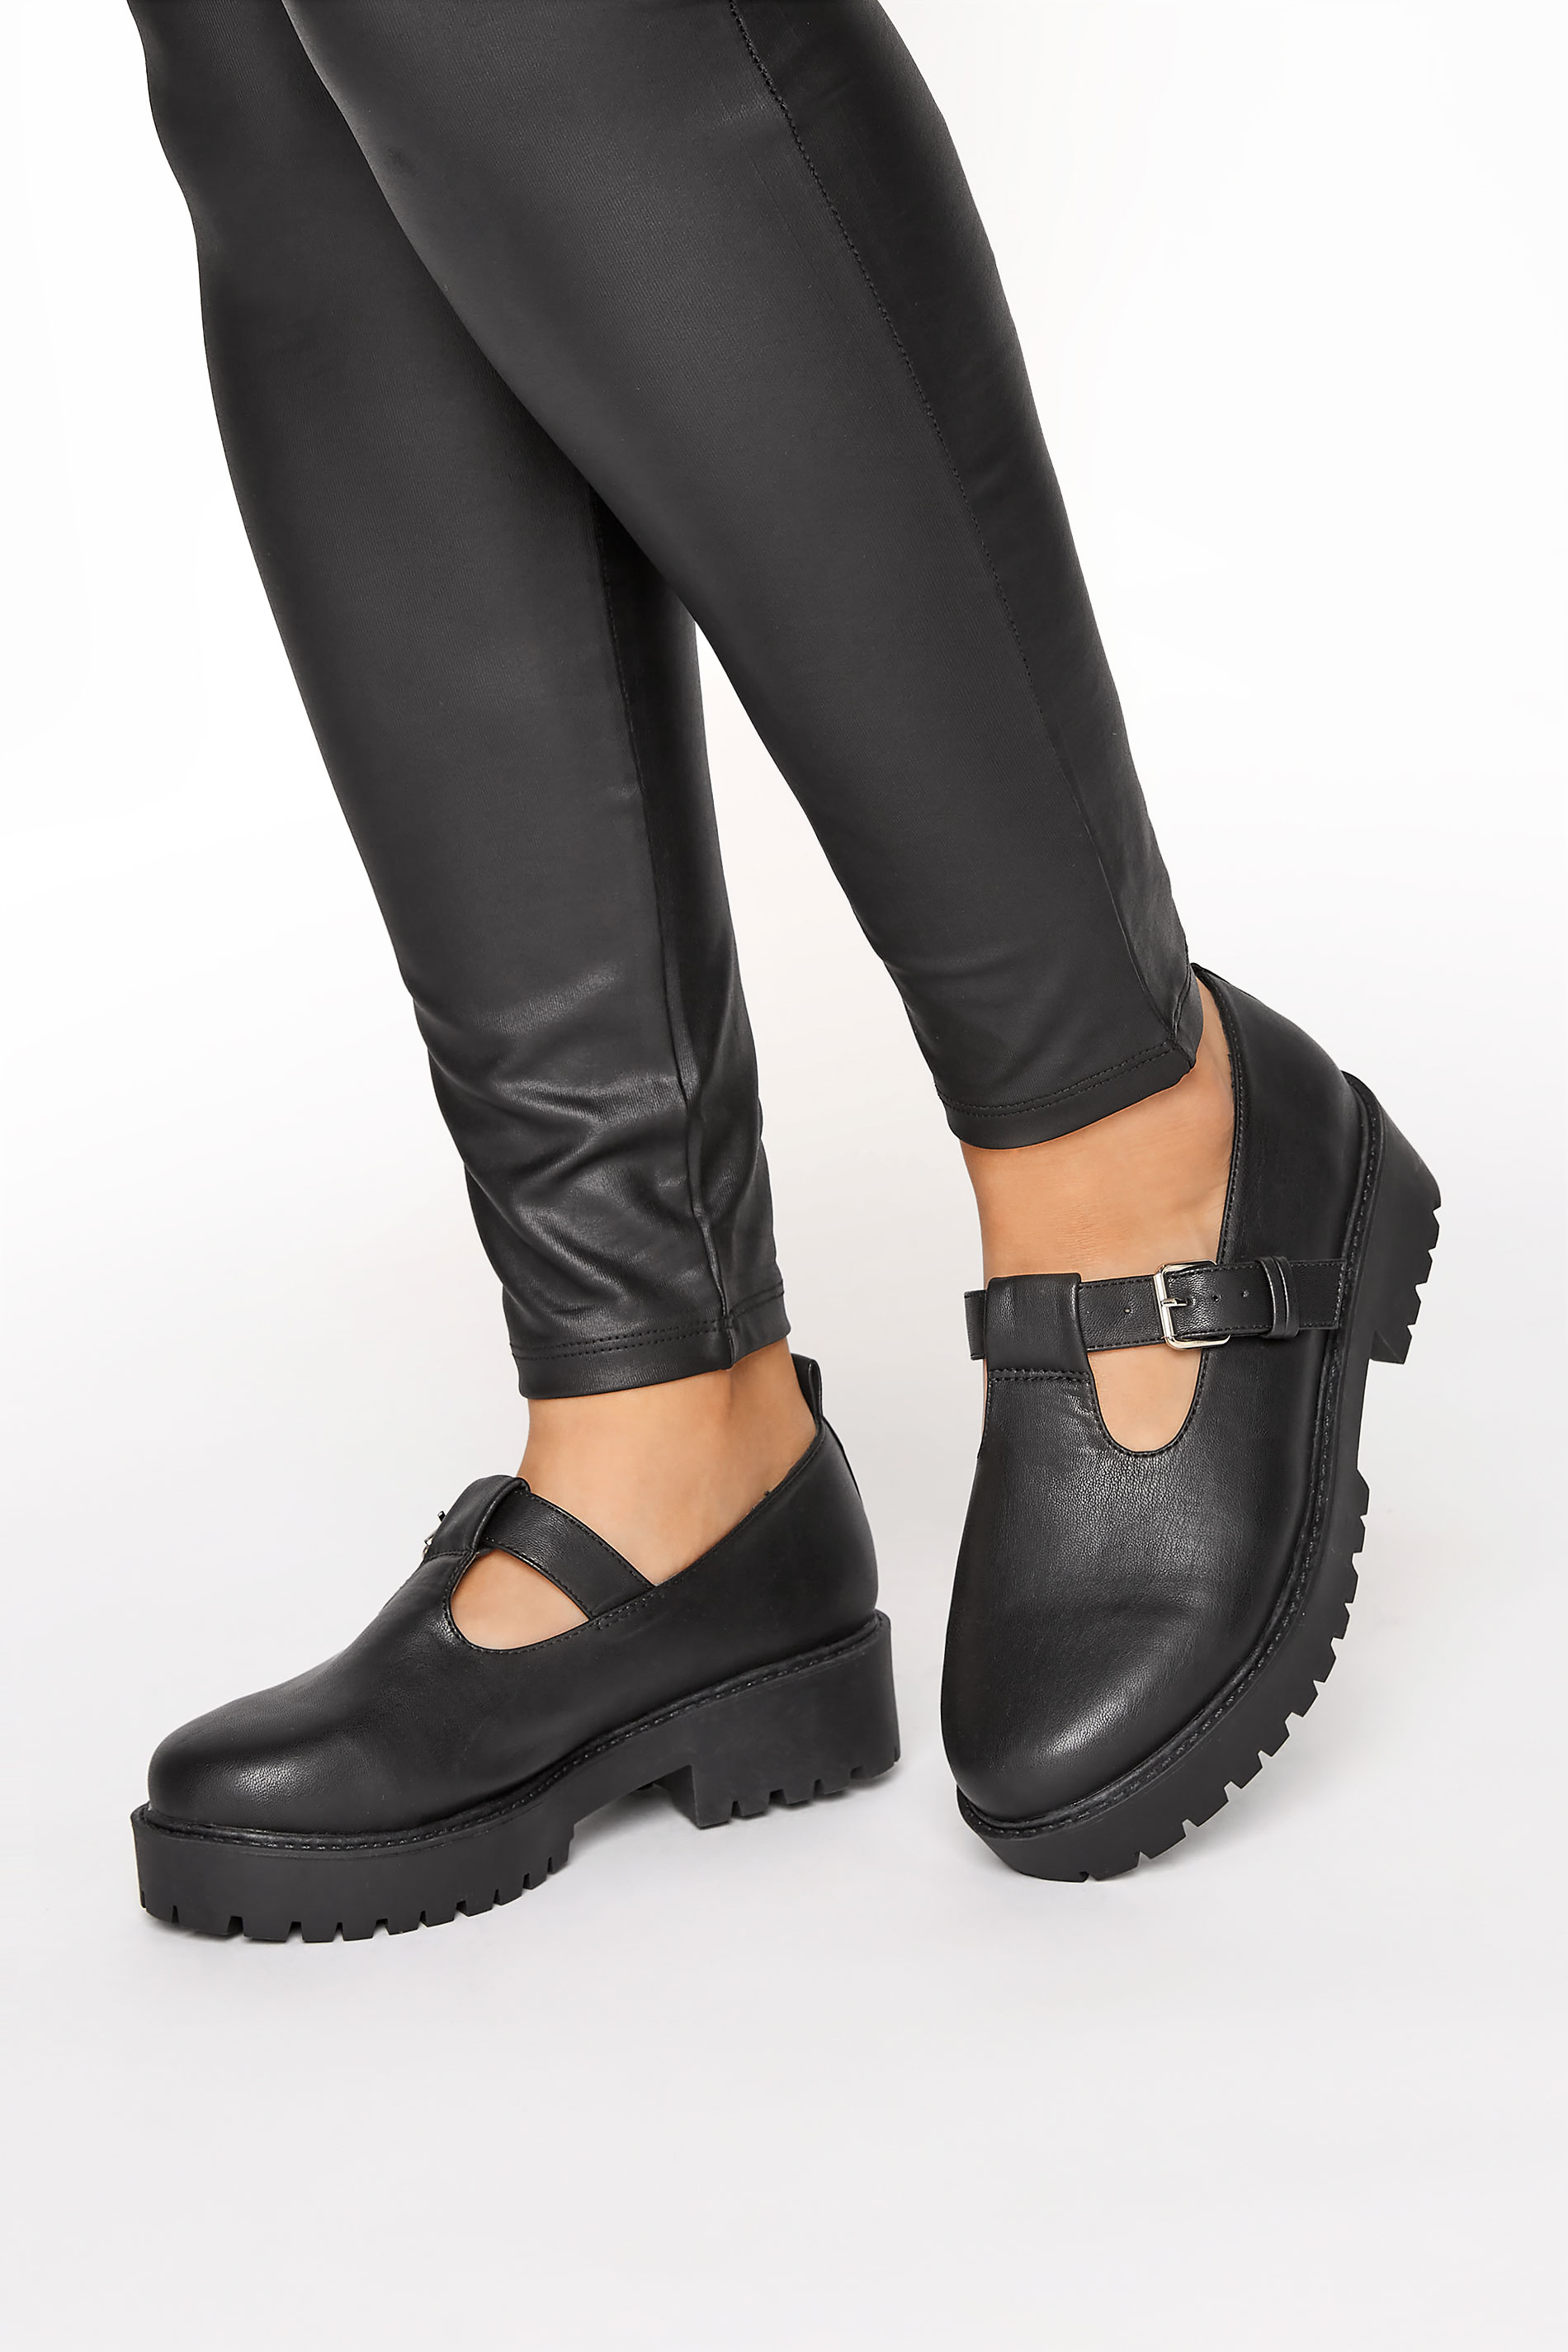 Plus Size LIMITED COLLECTION Black Mary Janes In Extra Wide Fit | Yours Clothing 1